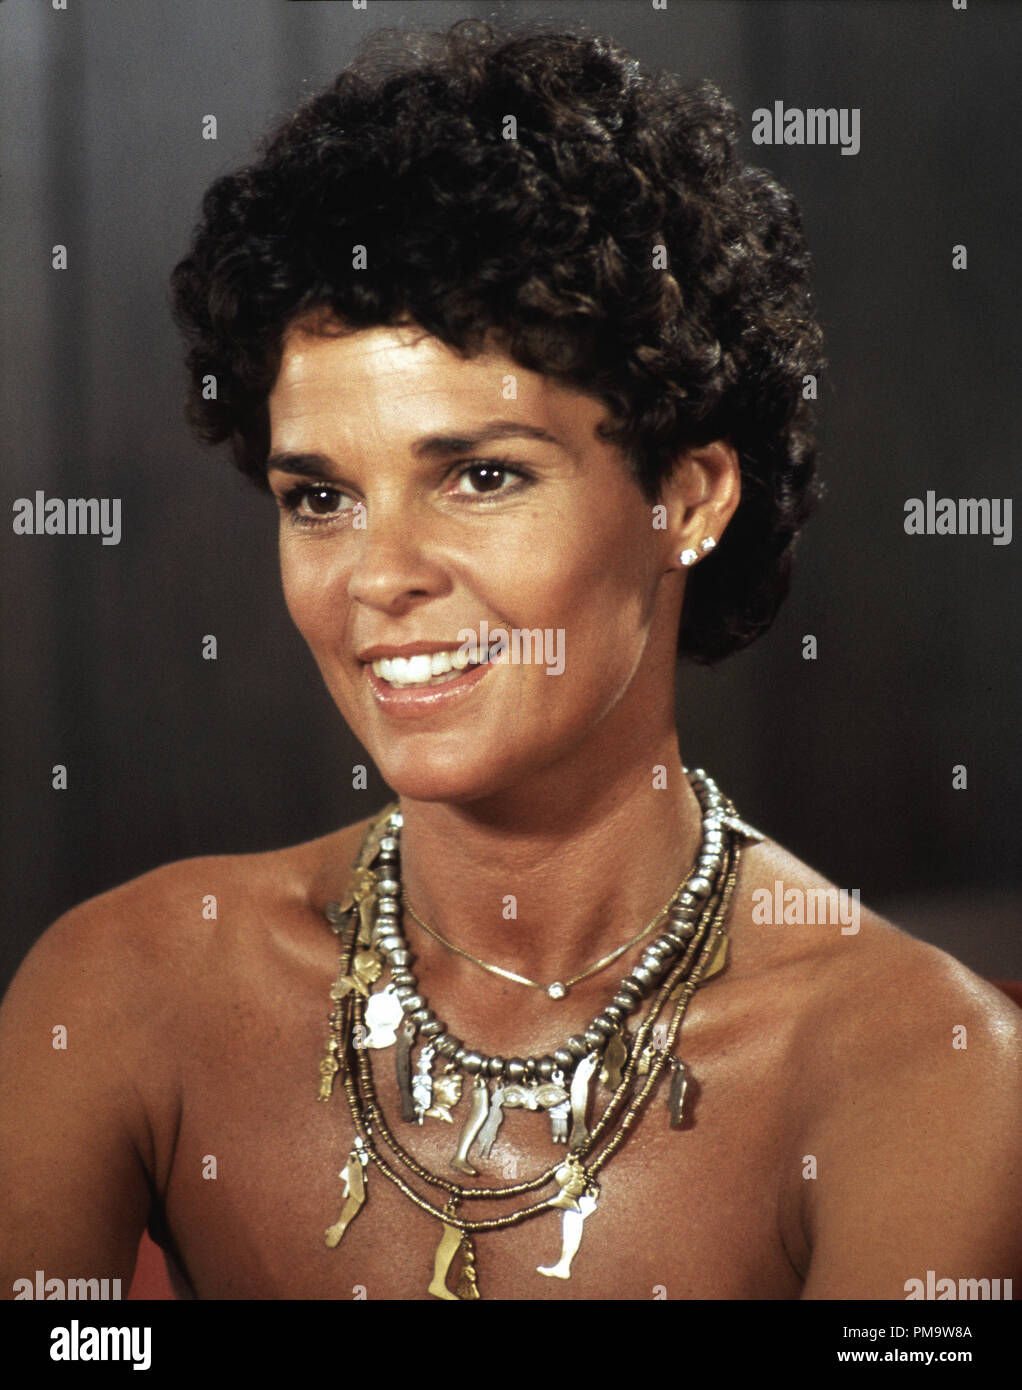 Studio Publicity Still from 'Convoy' Ali MacGraw © 1978 United Artists  All Rights Reserved   File Reference # 31720204THA  For Editorial Use Only Stock Photo